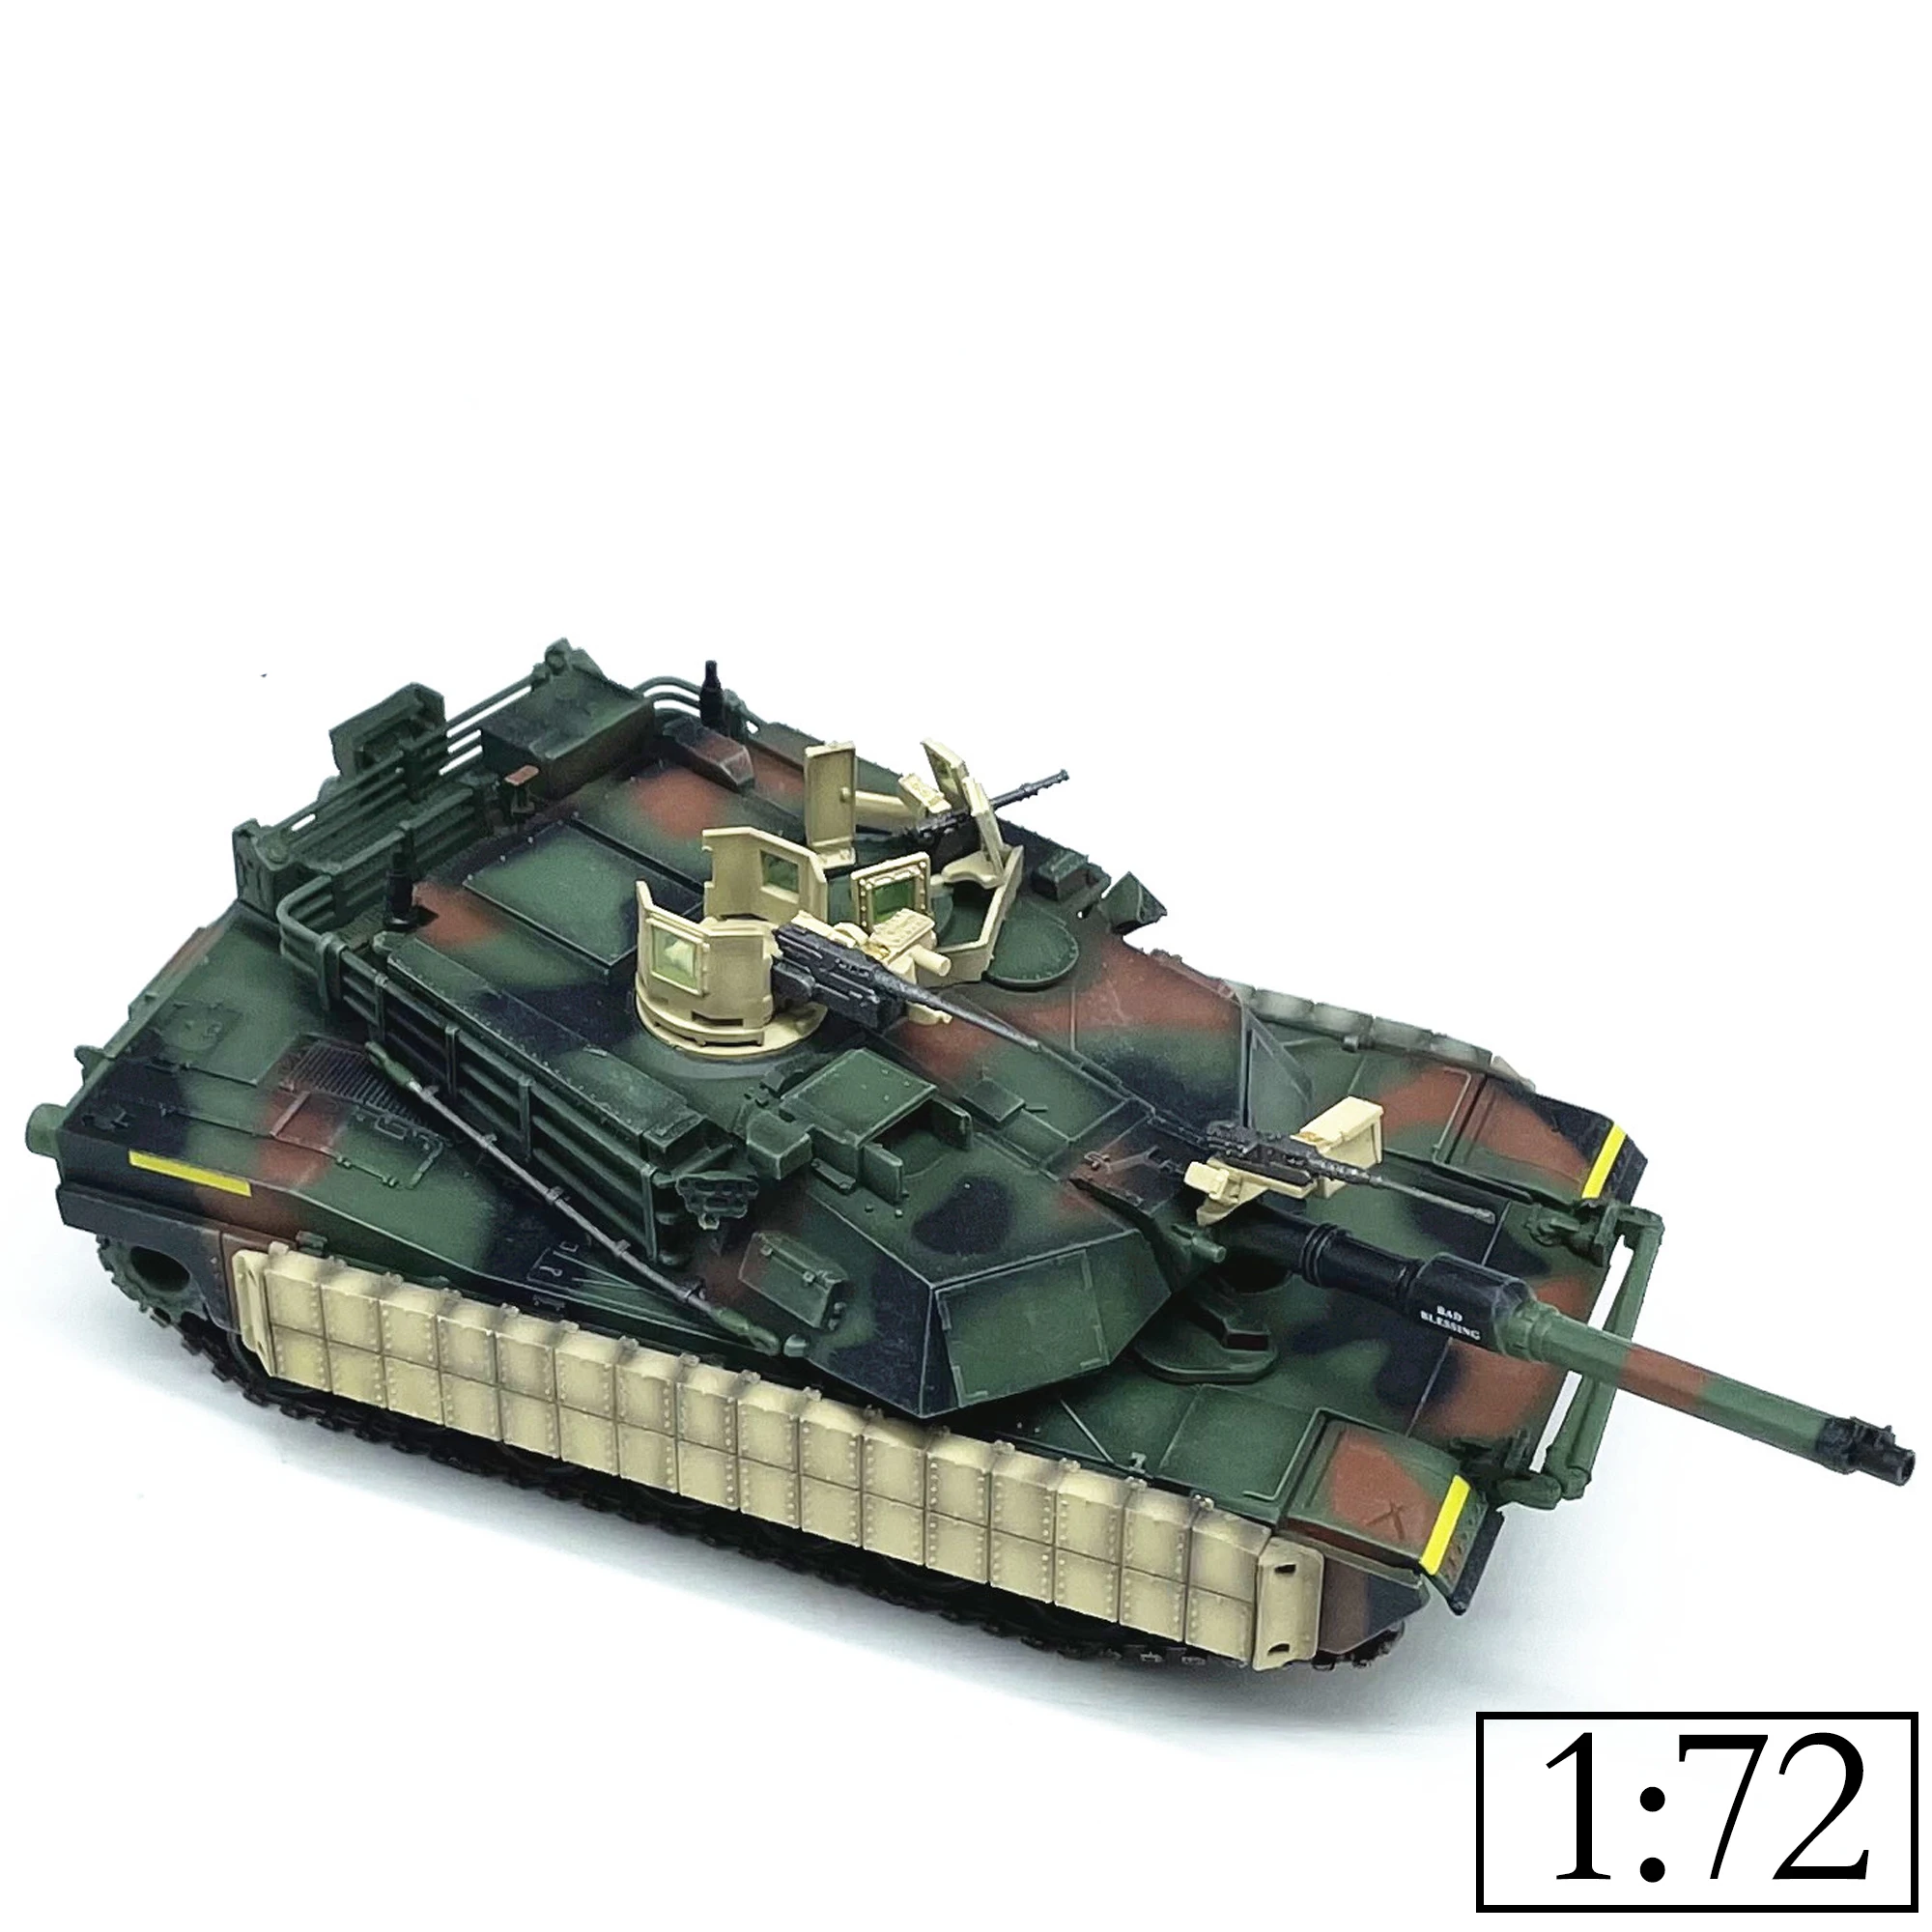 

1:72 Scale US M1A1 Abrams TUSK1 Main Battle Tank NATO Camouflage Tri-color Finished Militarized Combat Tracked Tank Tank Model